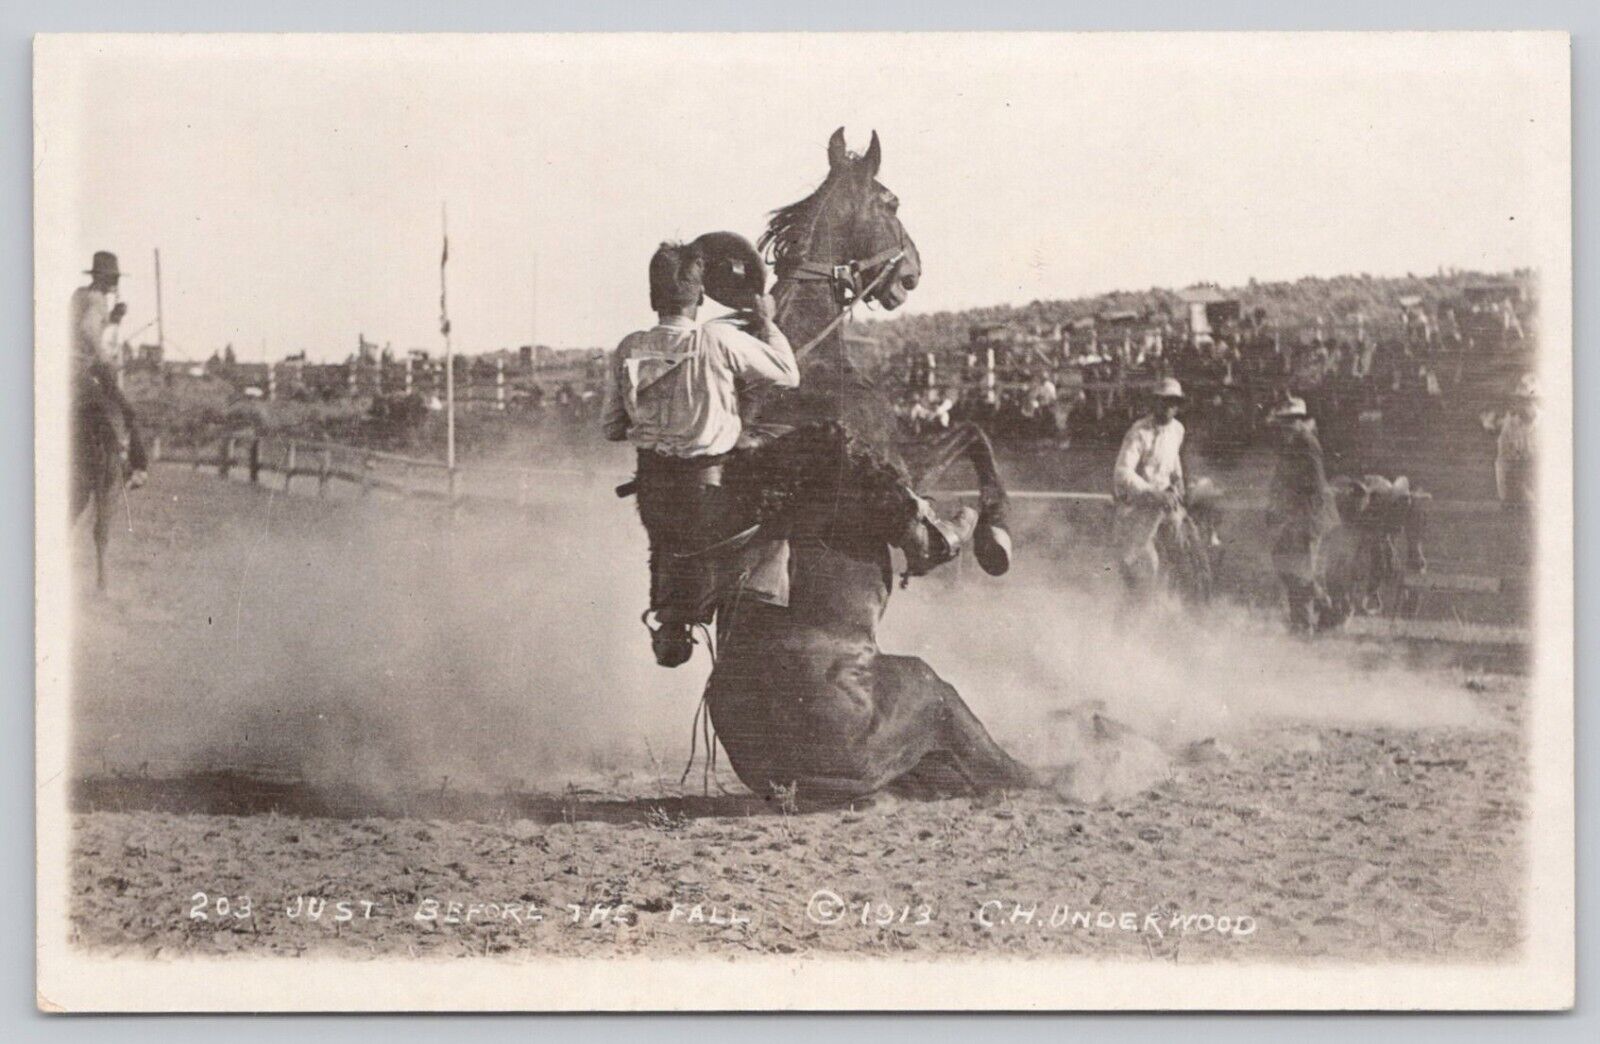 Western Rodeo Bronc Riding RPPC Postcard c1913 Just Before The Fall CH Underwood